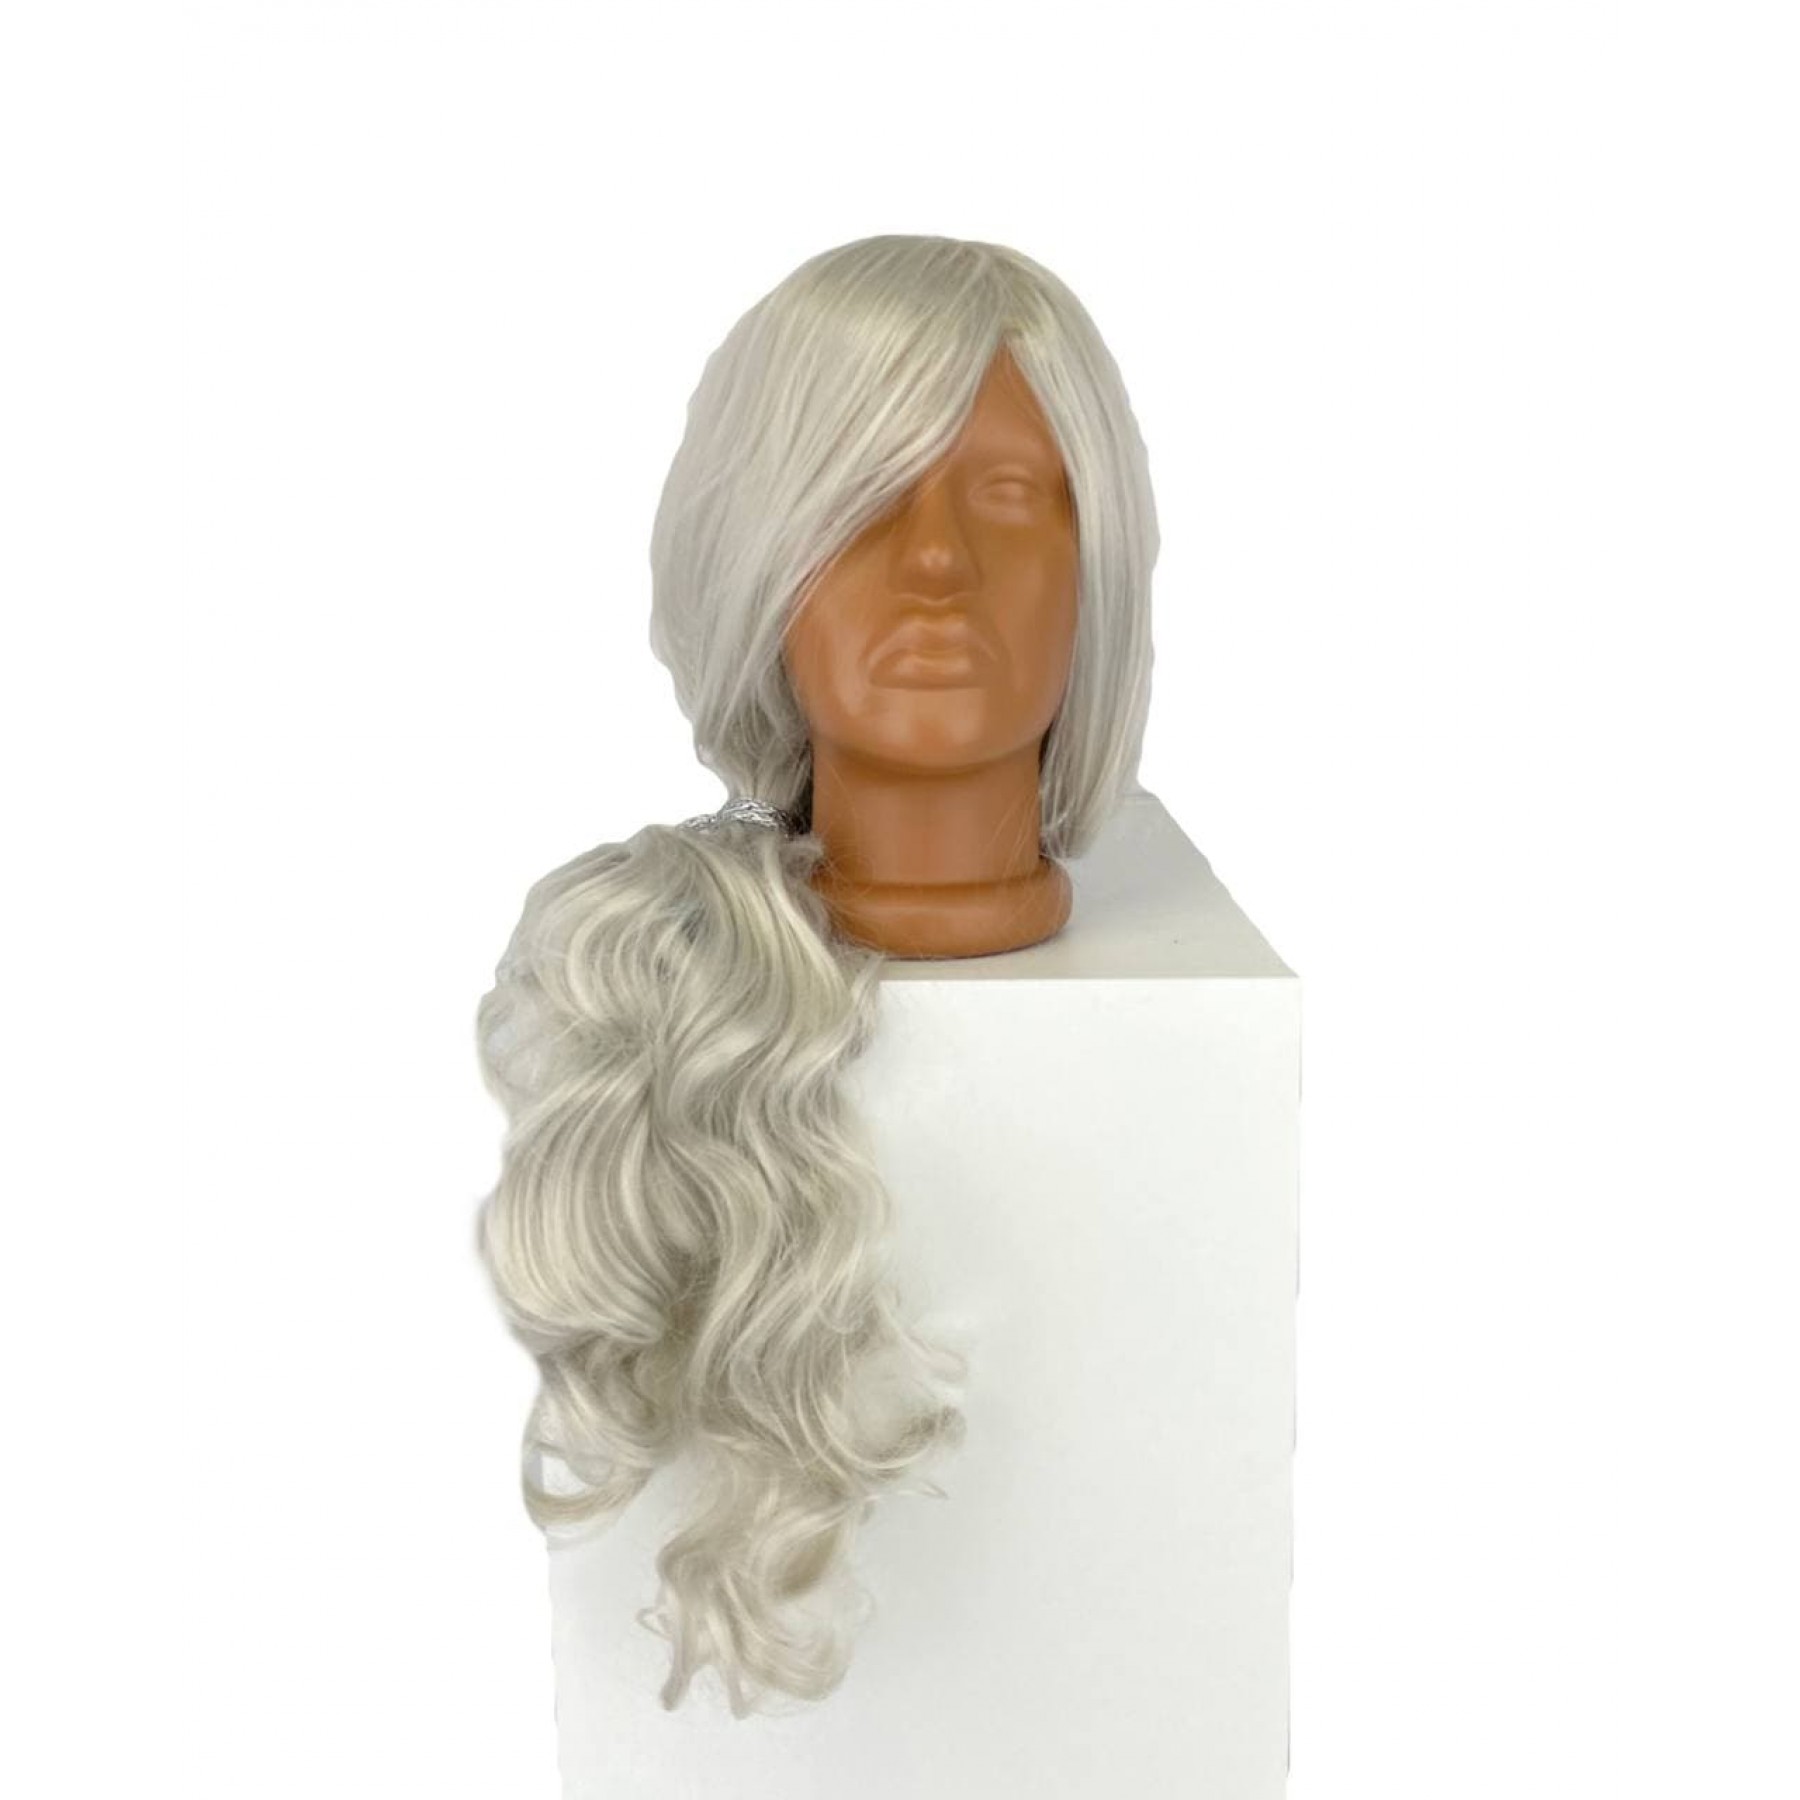 Snow Maiden Icy Wig